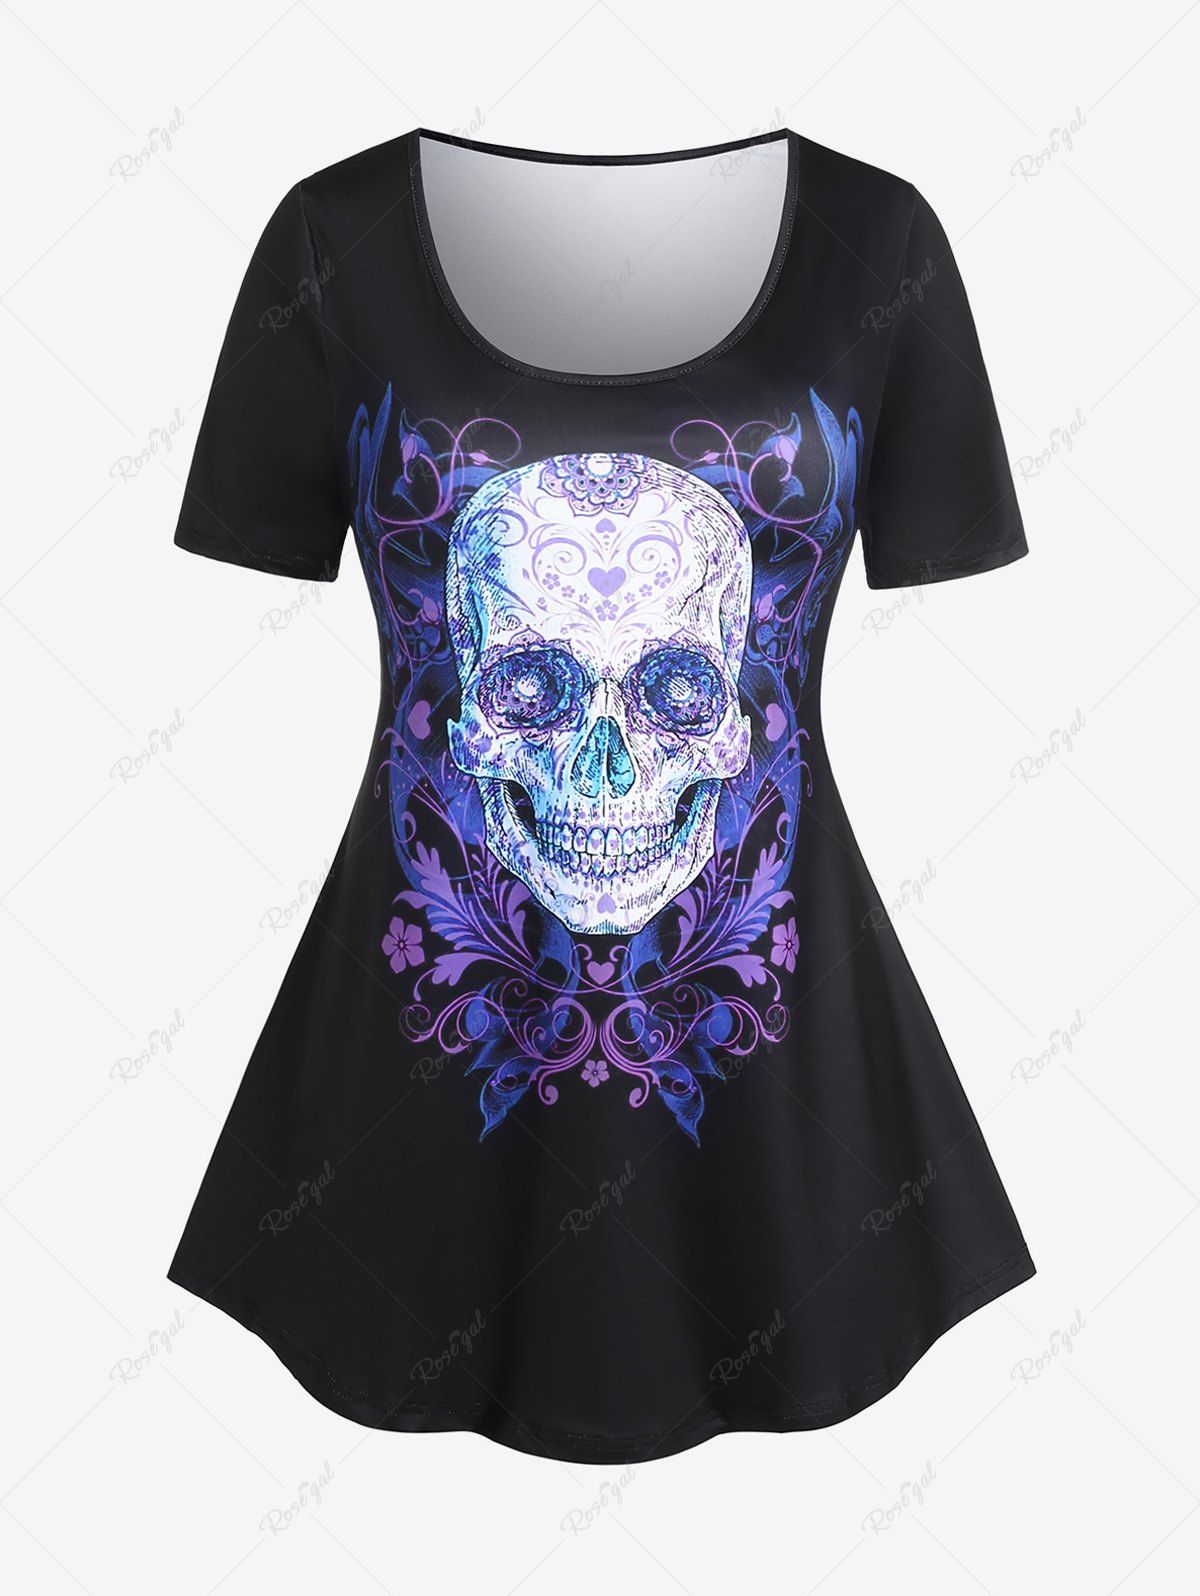 Chic Plus Size Skull Printed Short Sleeves Gothic Tee  